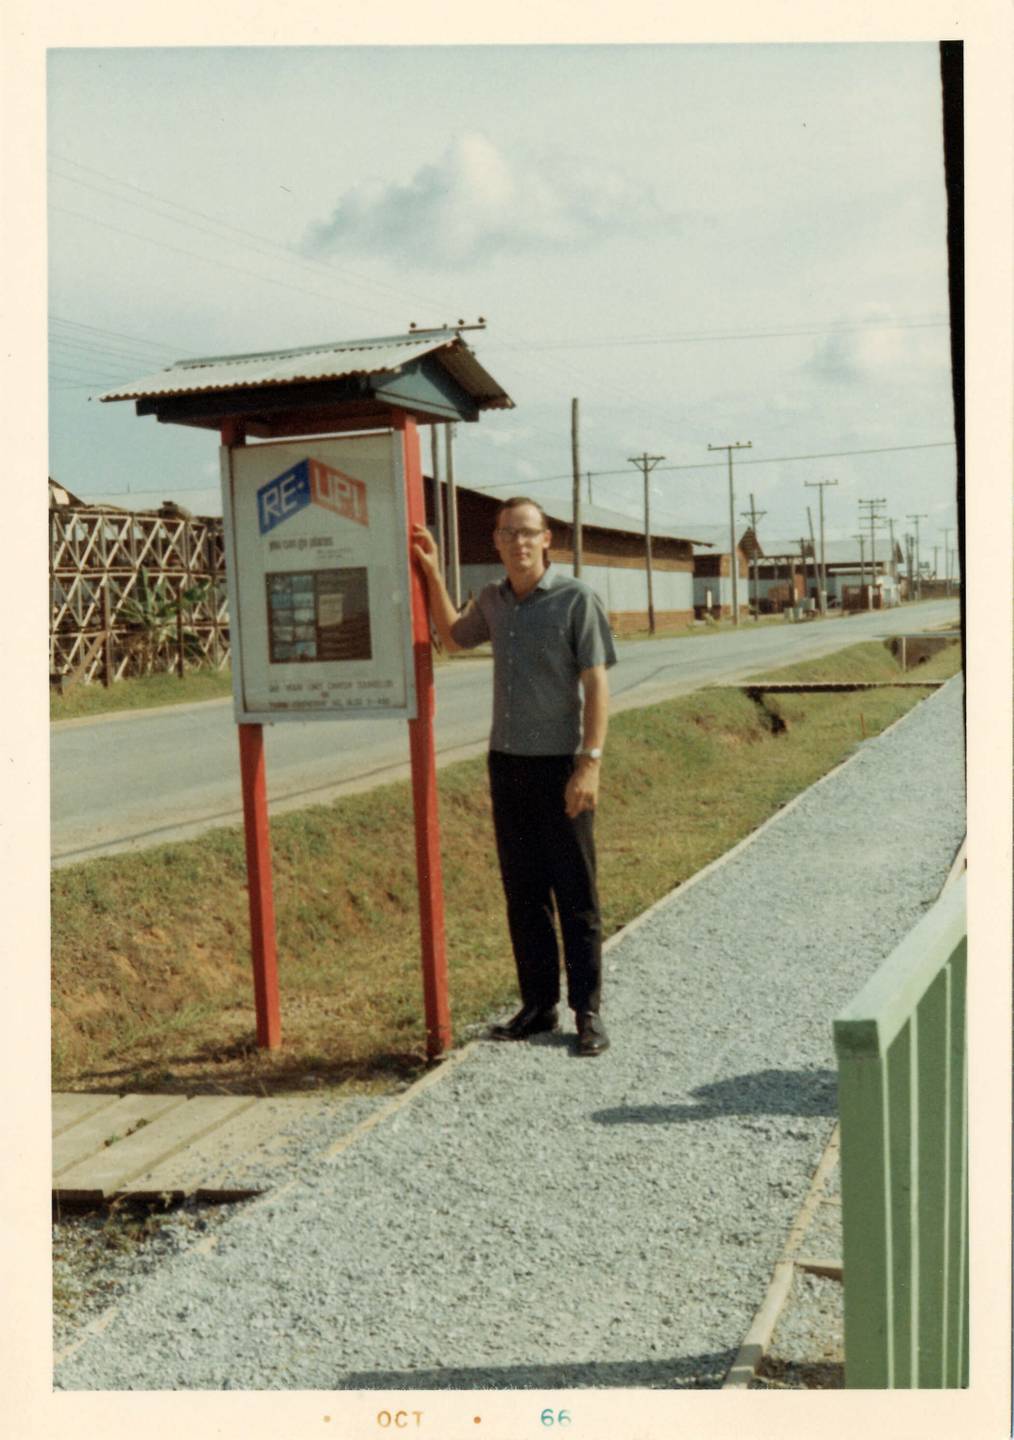 A young man in civilian clothes standing next to a sign that says "Re-Up!" Margins indicate photo is from October 1966.